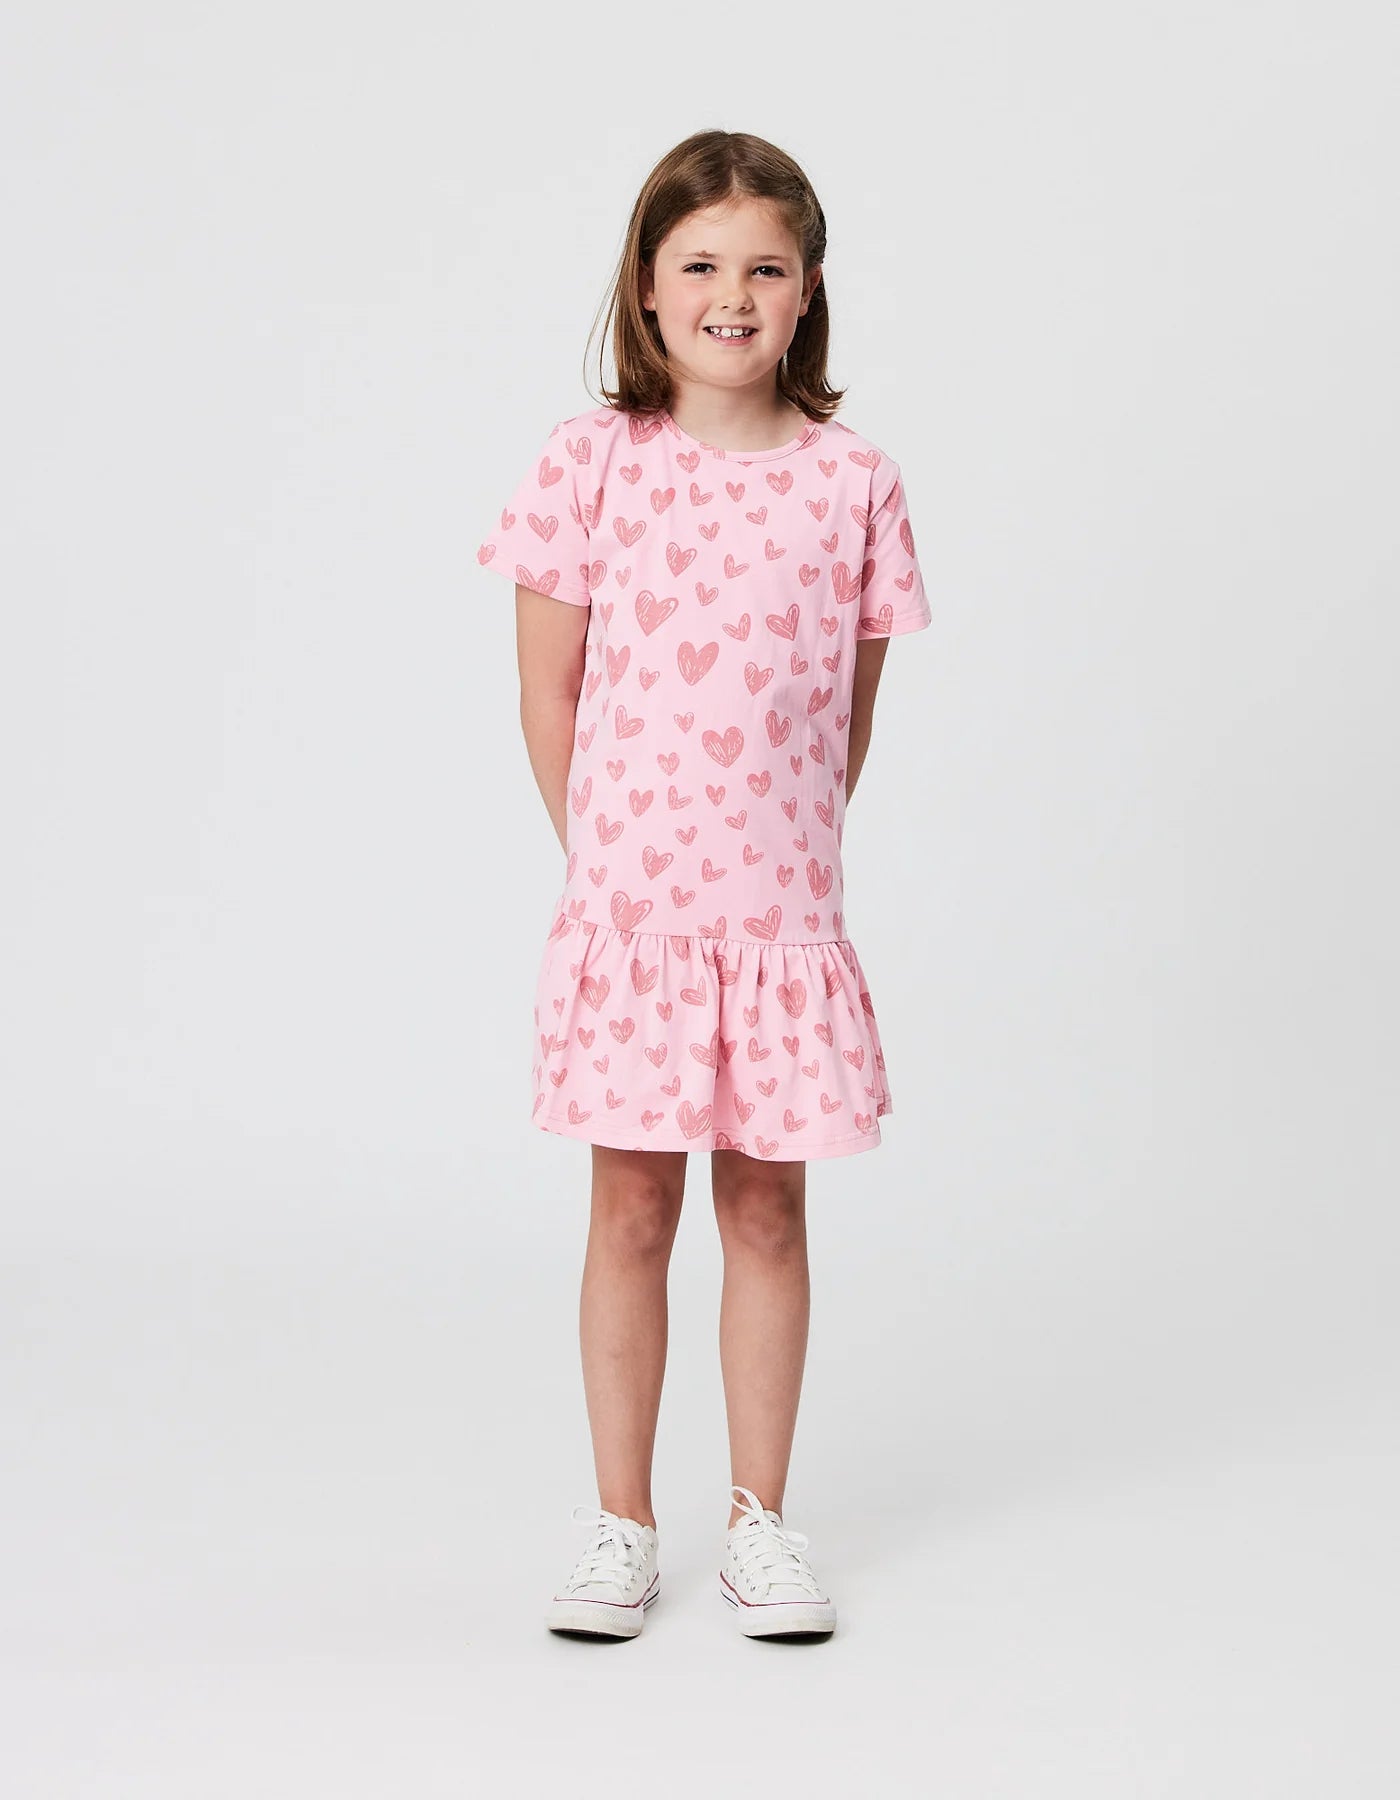 KISSED BY RADICOOL HEARTS FRILL DRESS